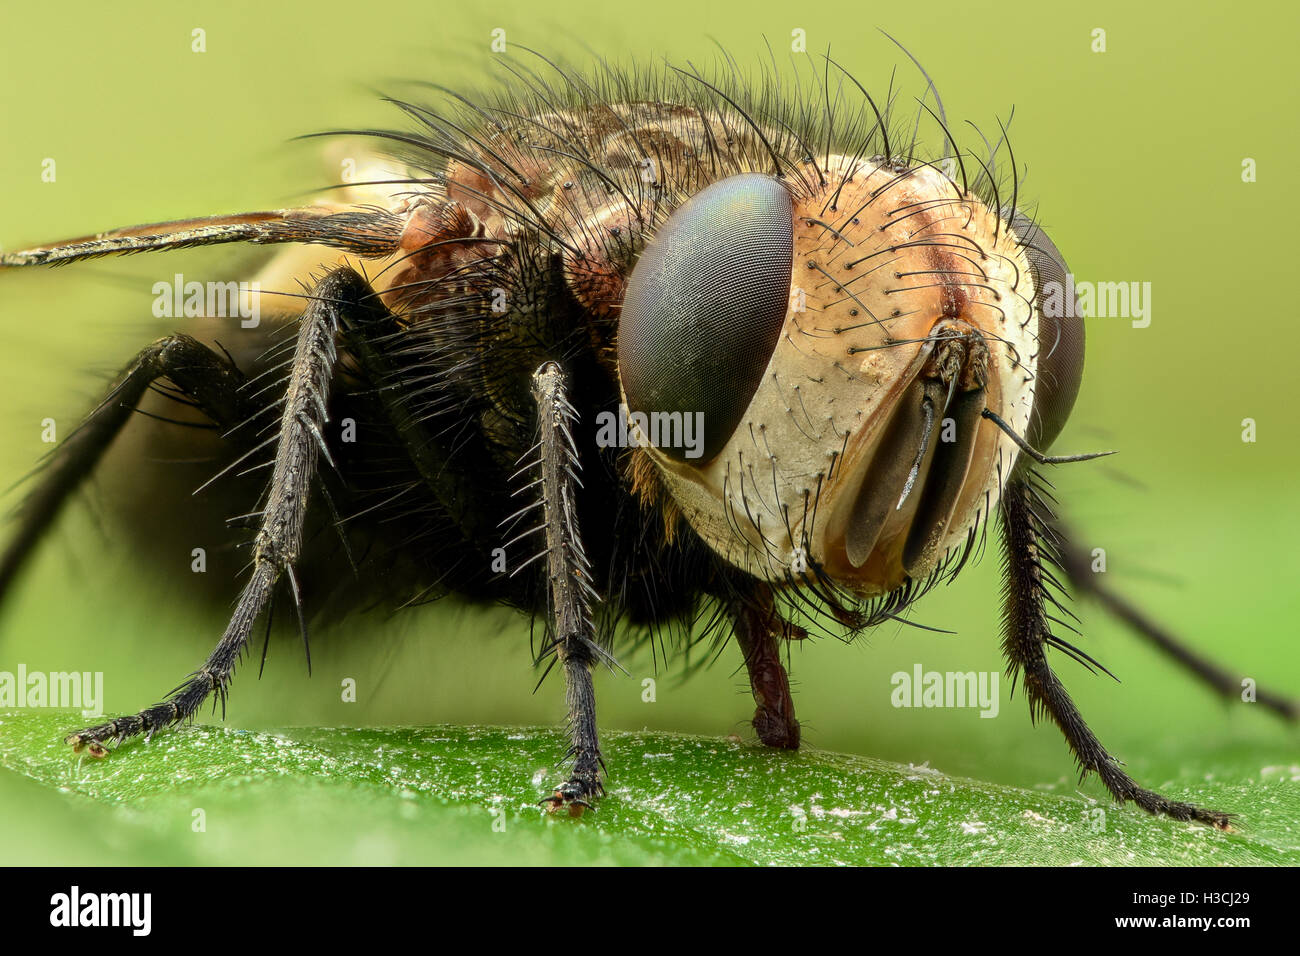 Extreme magnification - Fly on a leaf, side view Stock Photo